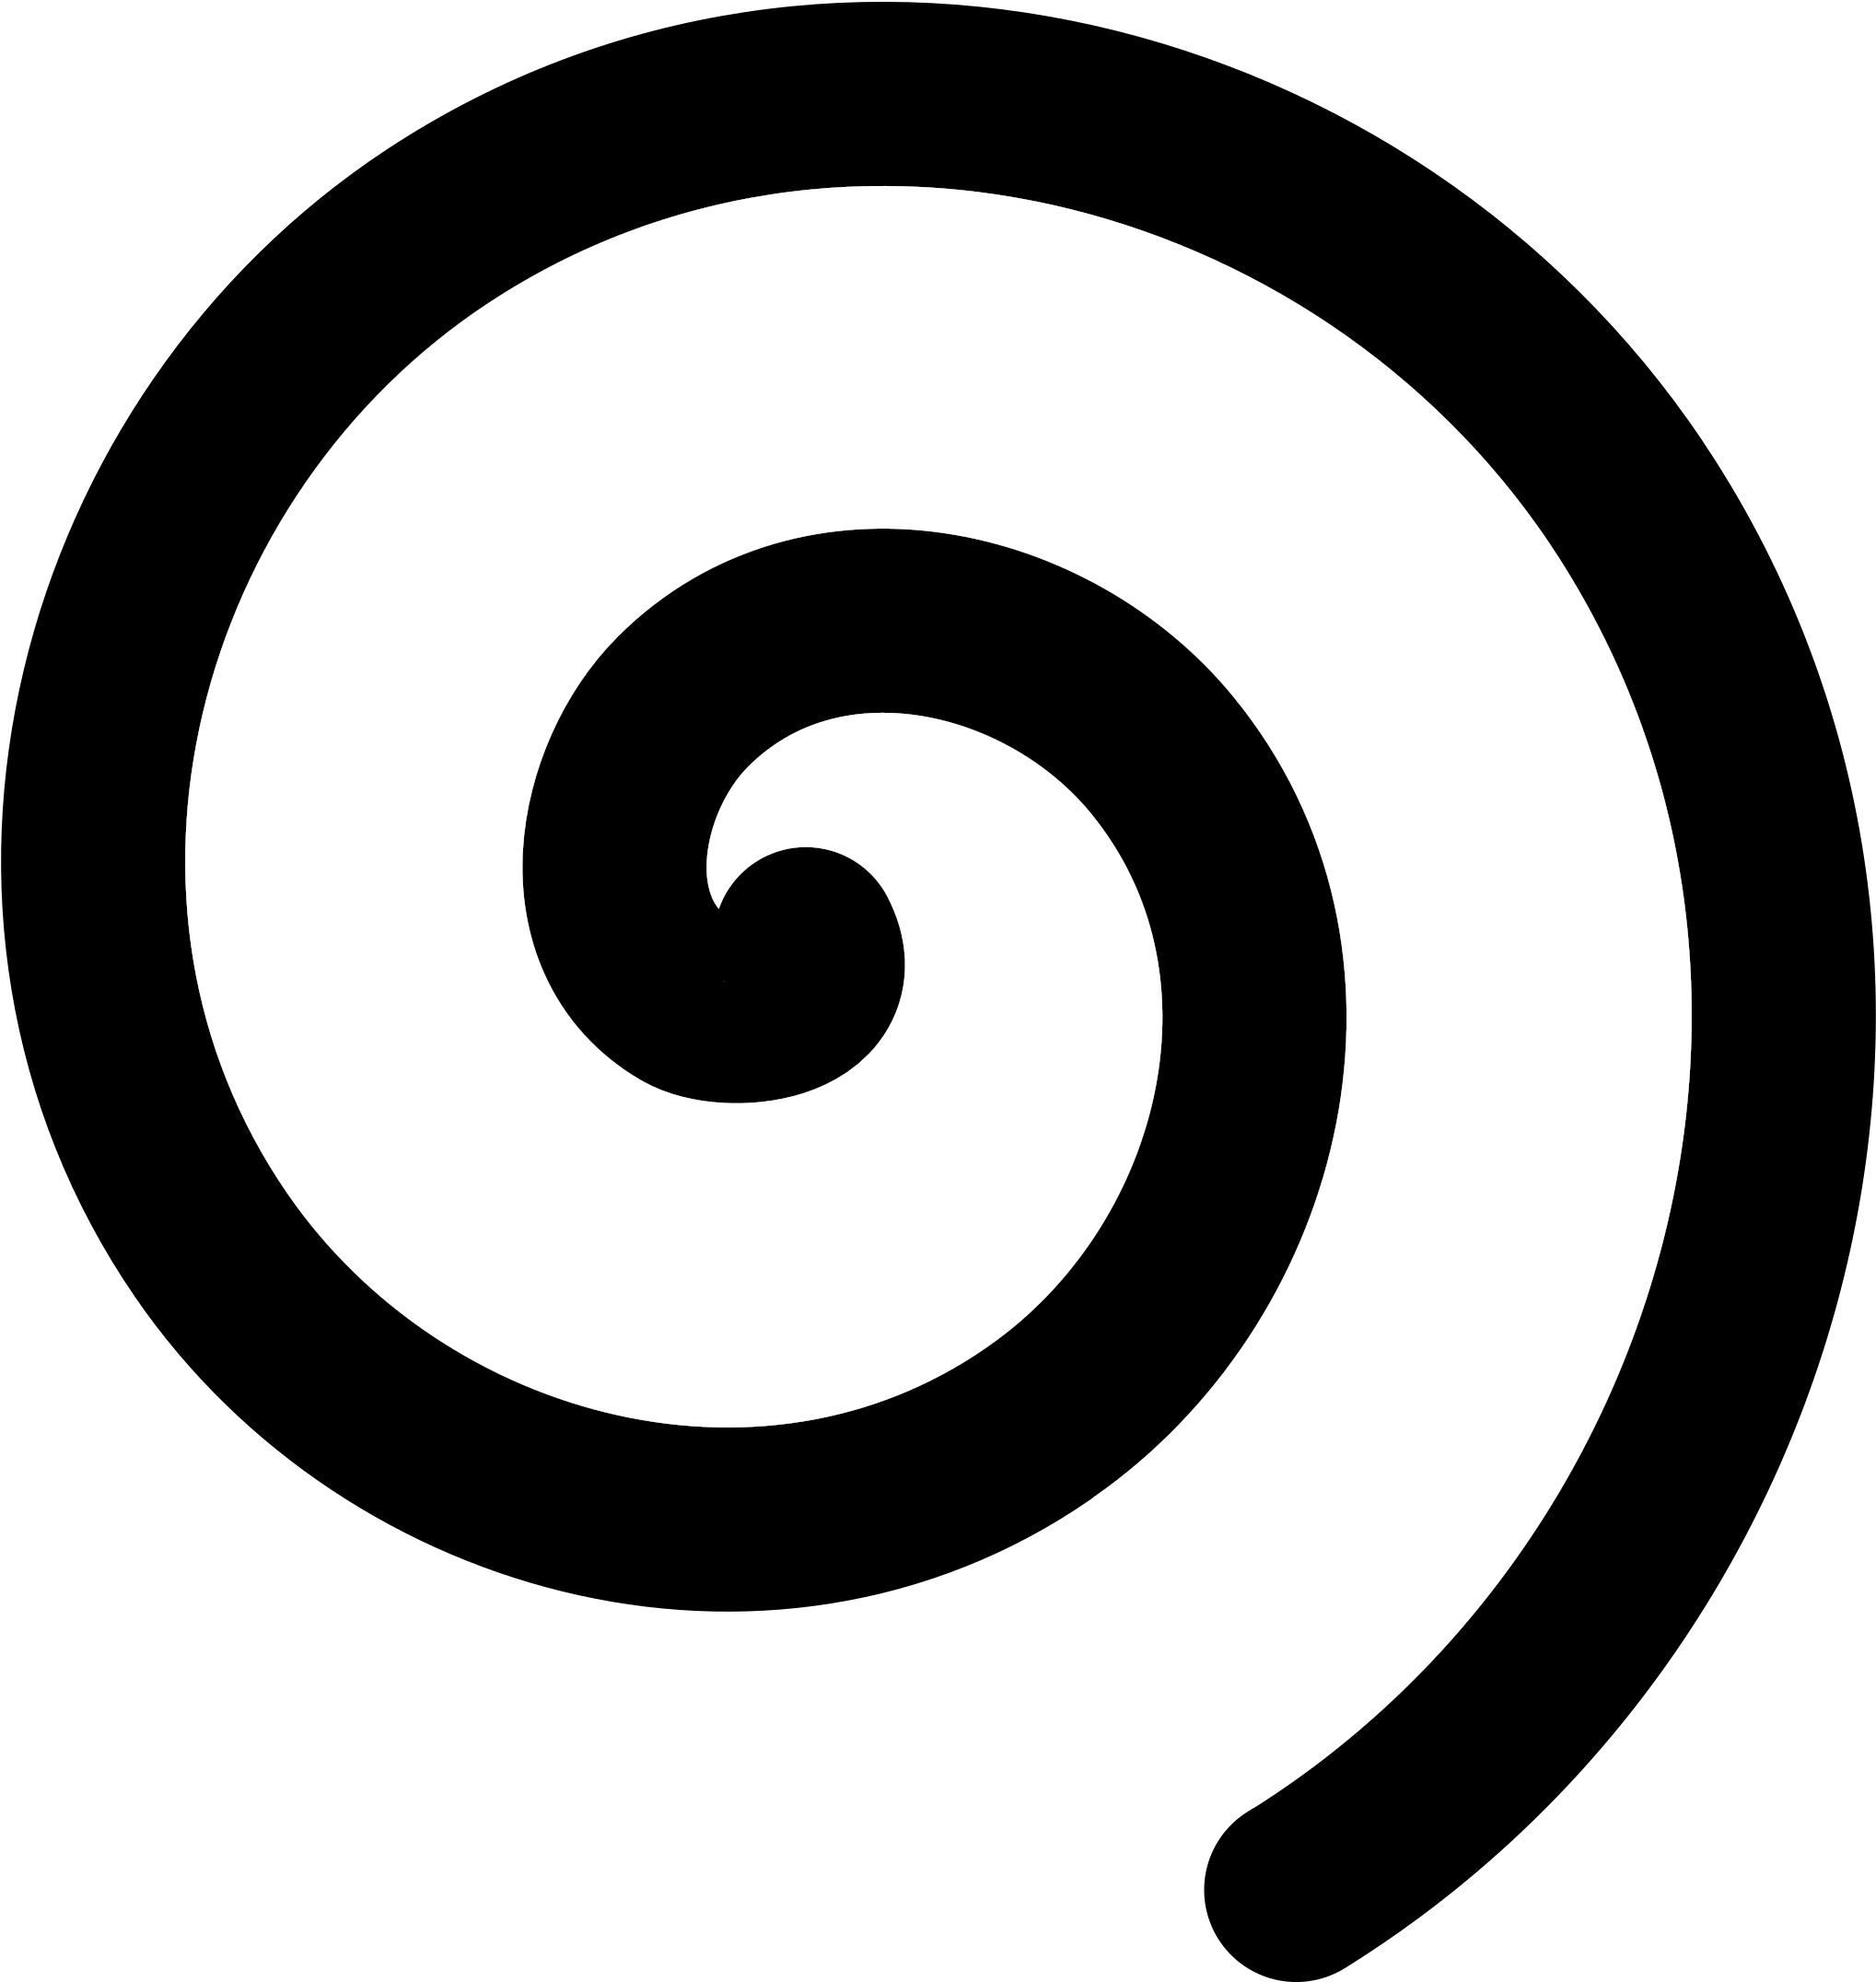 A Black And White Spiral